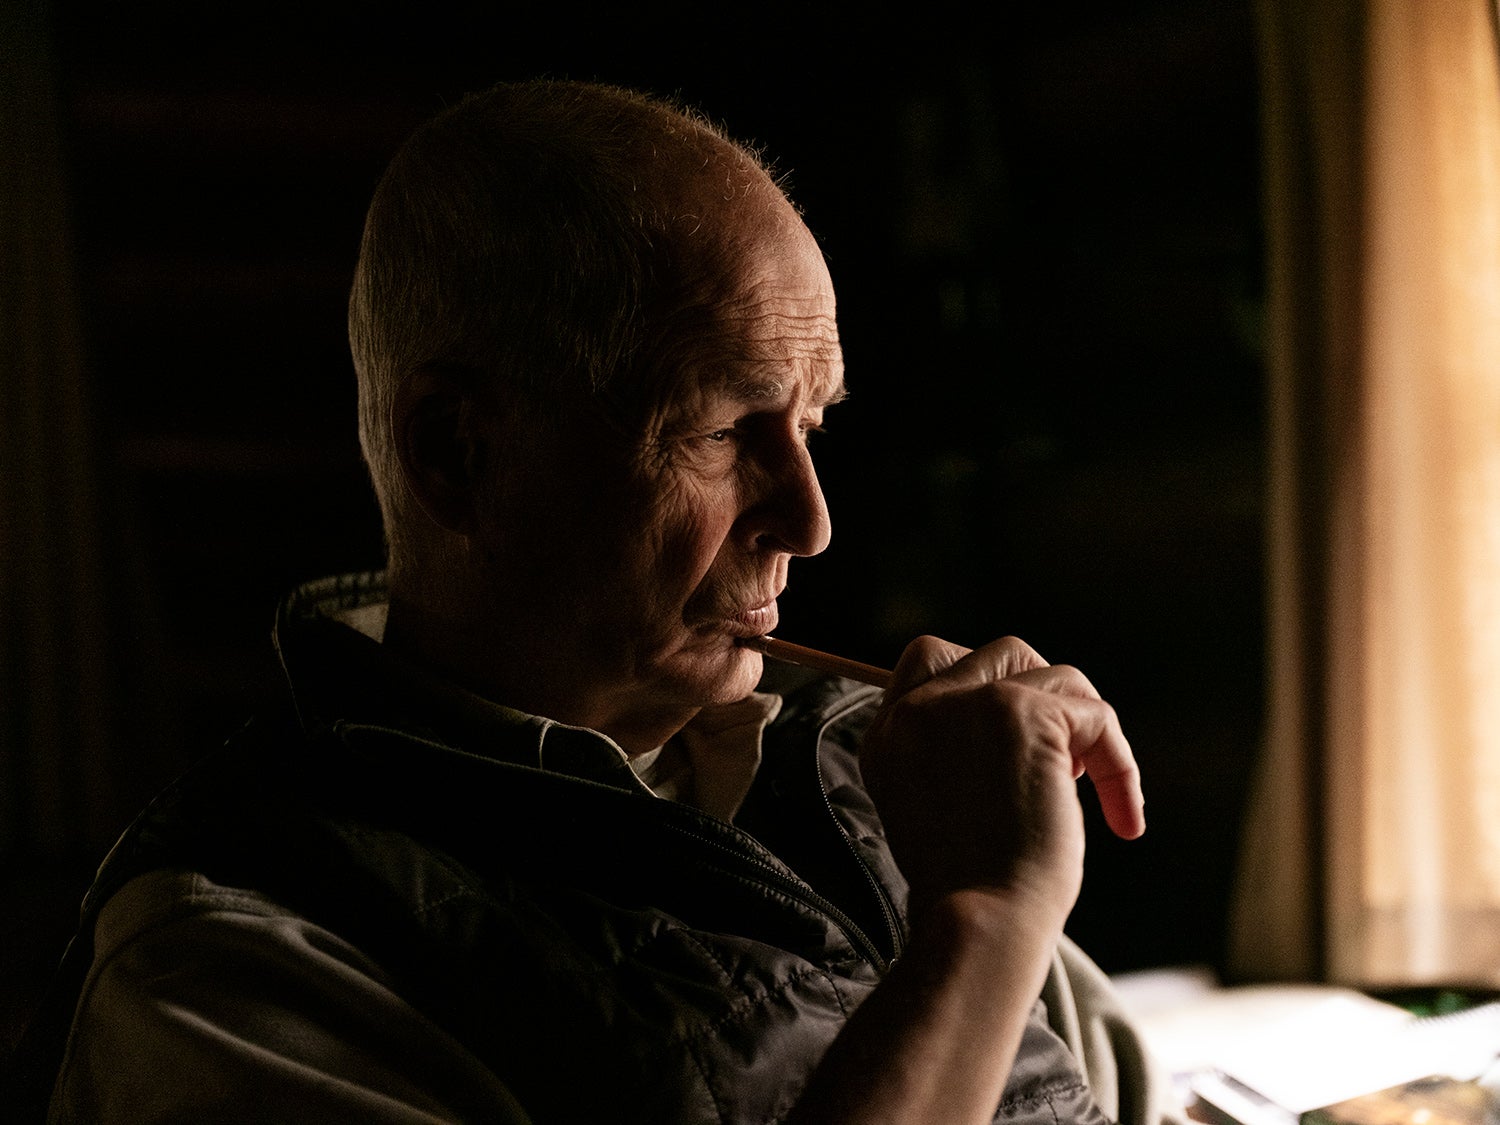 A man sits in a dark cabin, holding a pen and looking down at a desk.